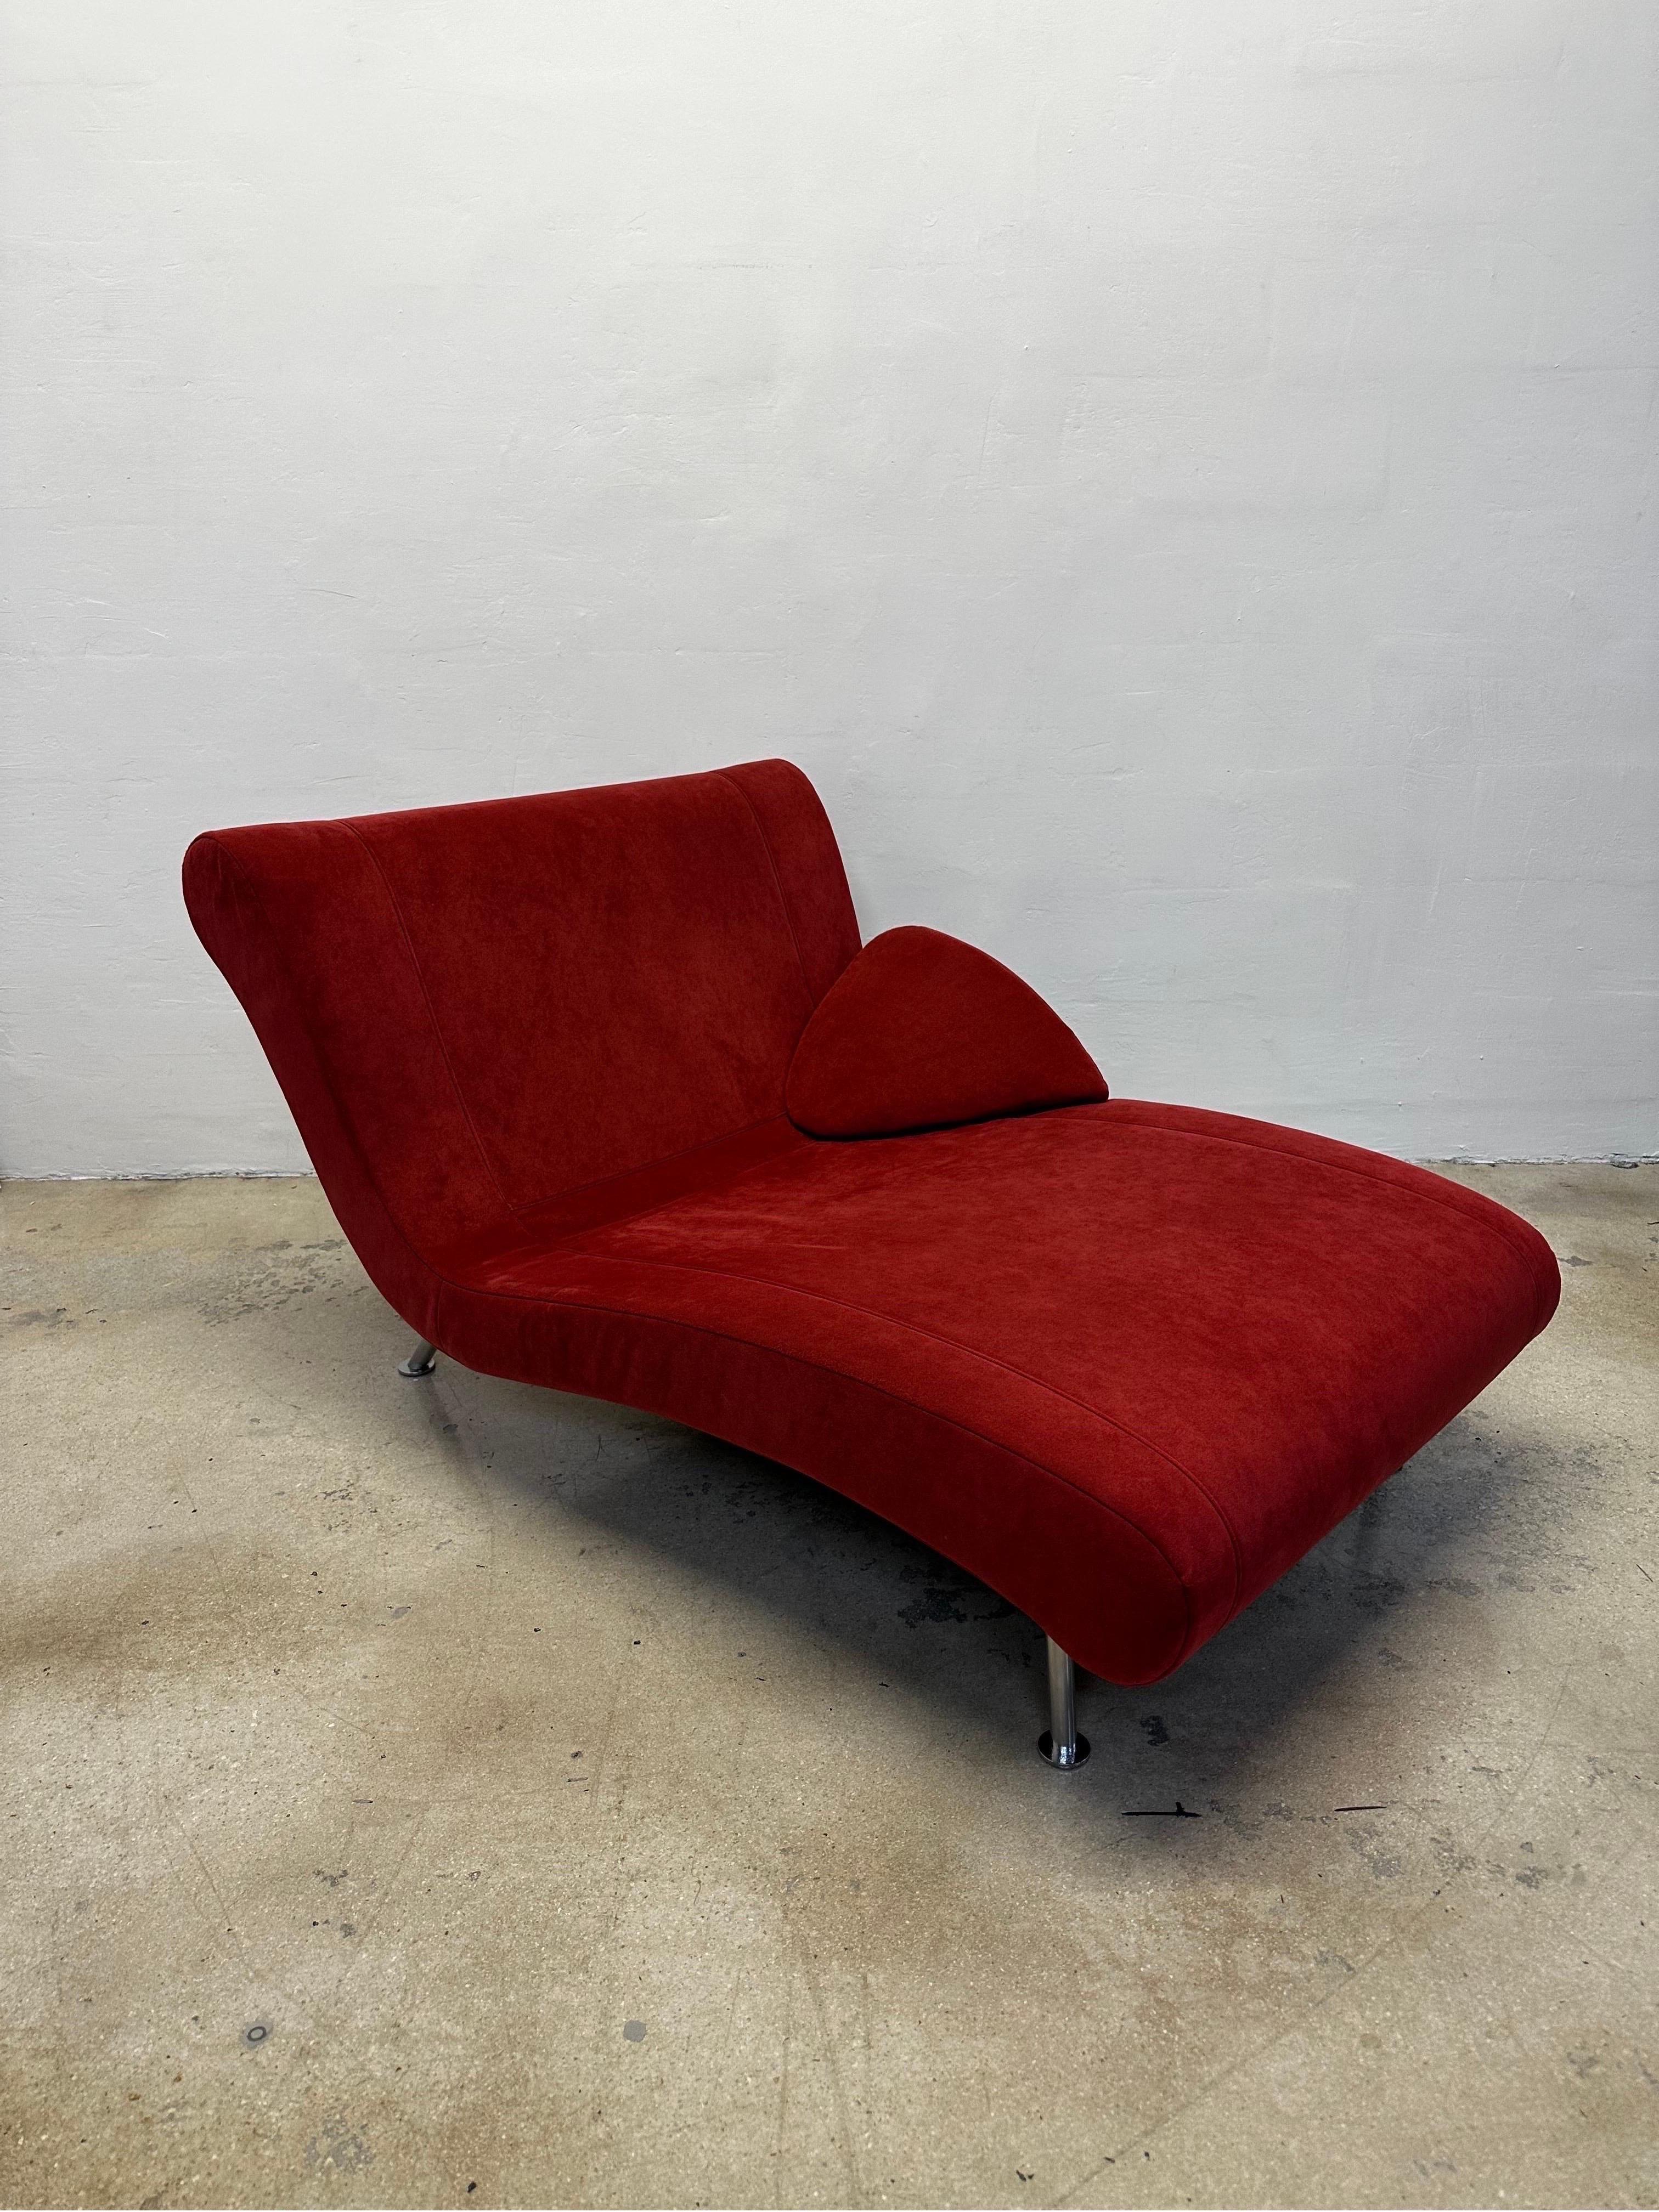 Dolce Vita Postmodern chaise lounge with burnt orange ultra suede fabric and newly powder-coated silver finished steel legs by Pascal Mourgue for Cinna Ligne Roset.